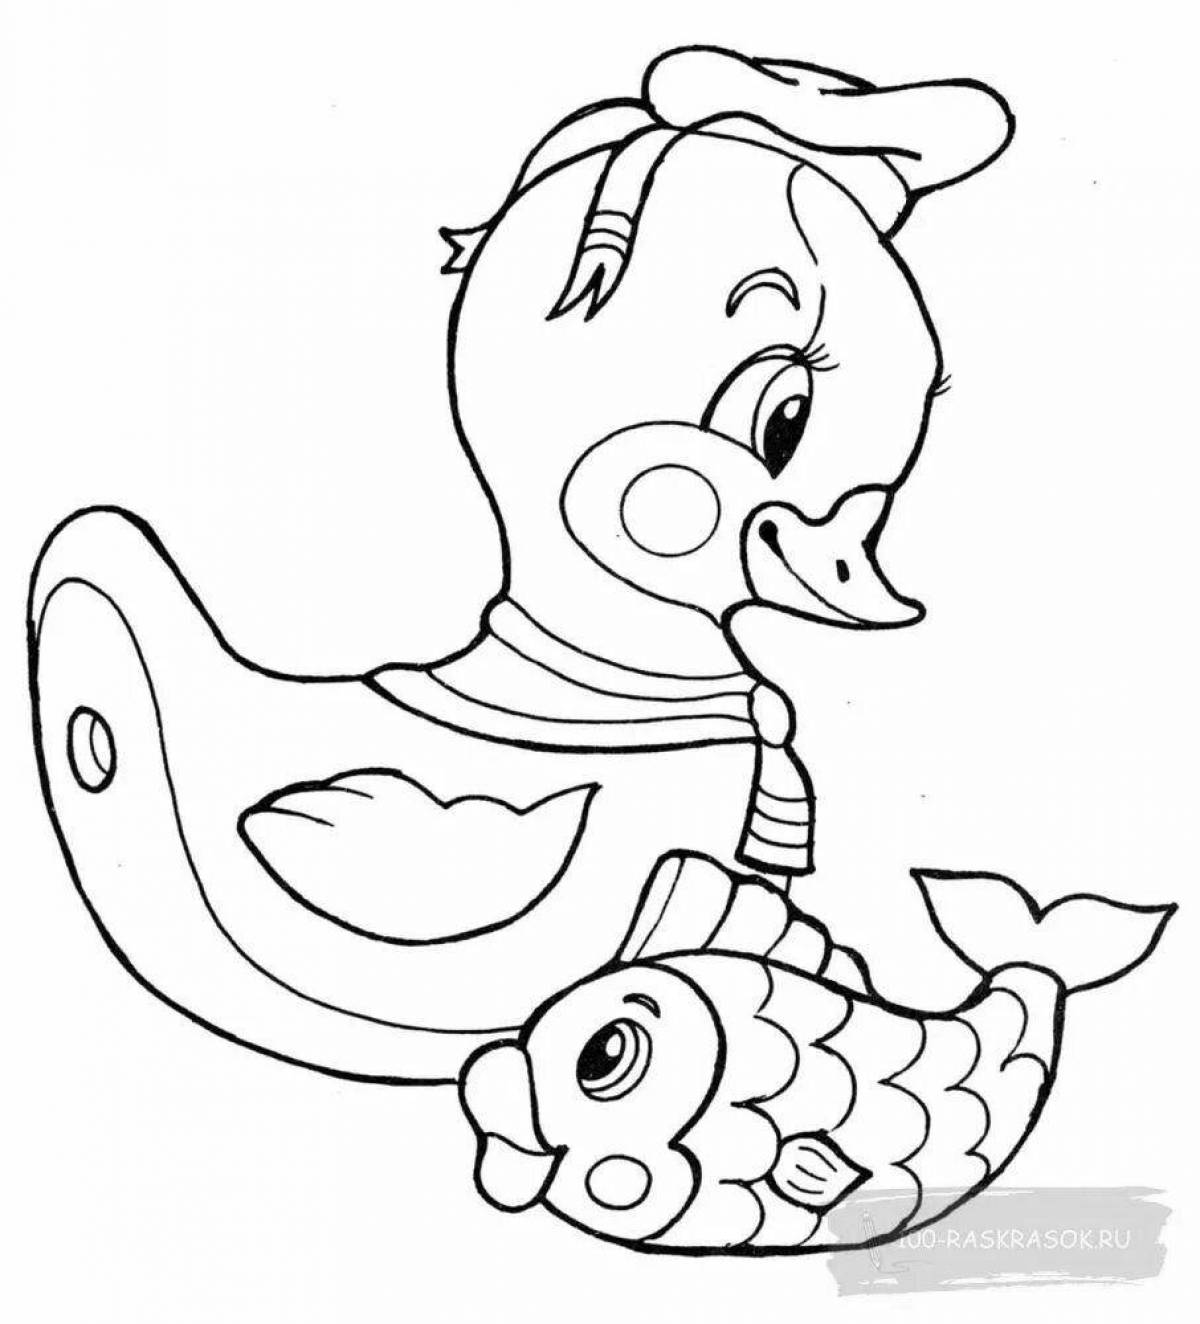 Grand coloring page утка алафанфан